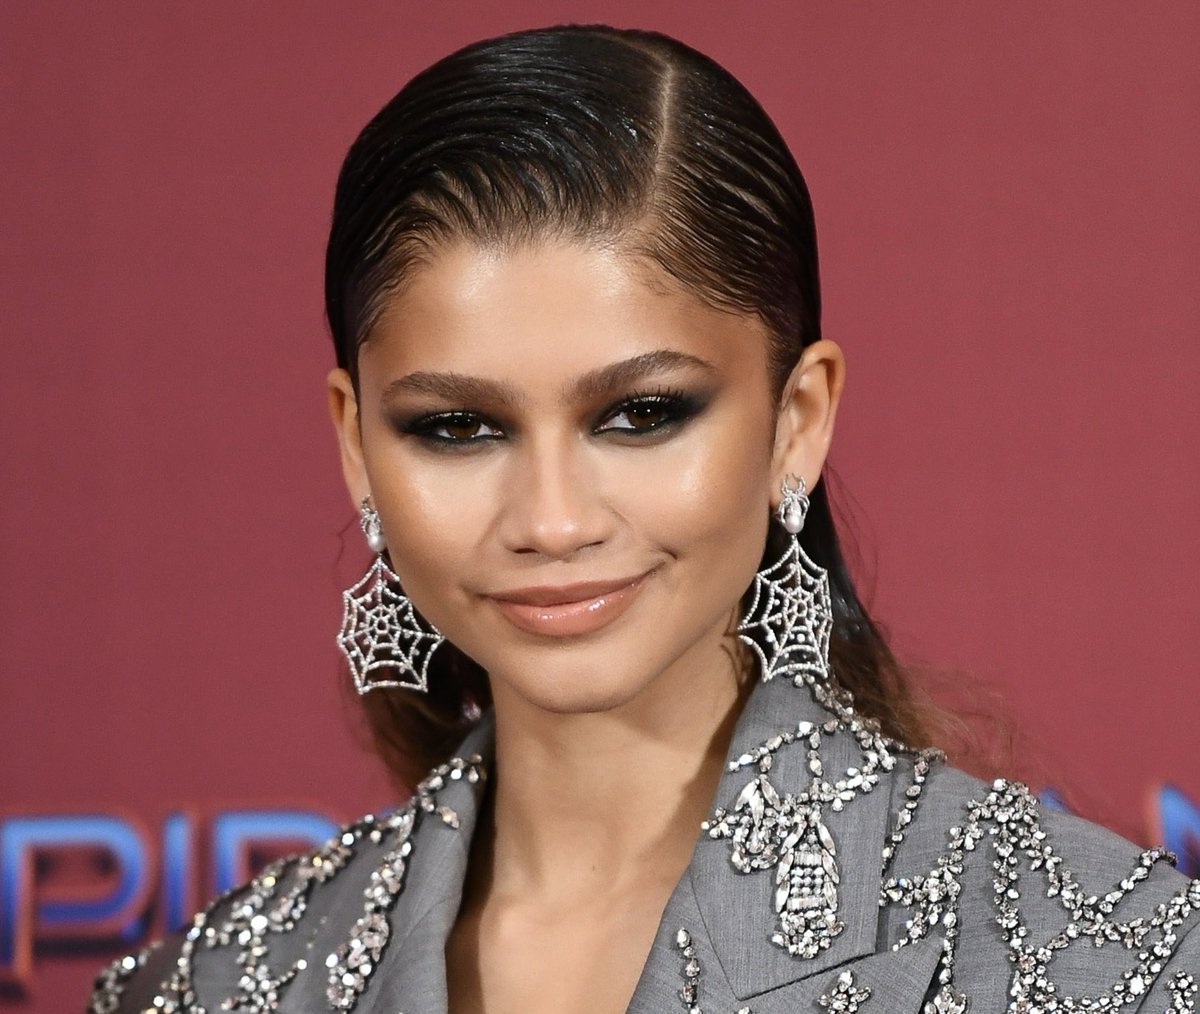 RT @dayapeters: zendaya in alexander mcqueen ss22 details for the spider-man no way home london photocall https://t.co/hty8AItmJH